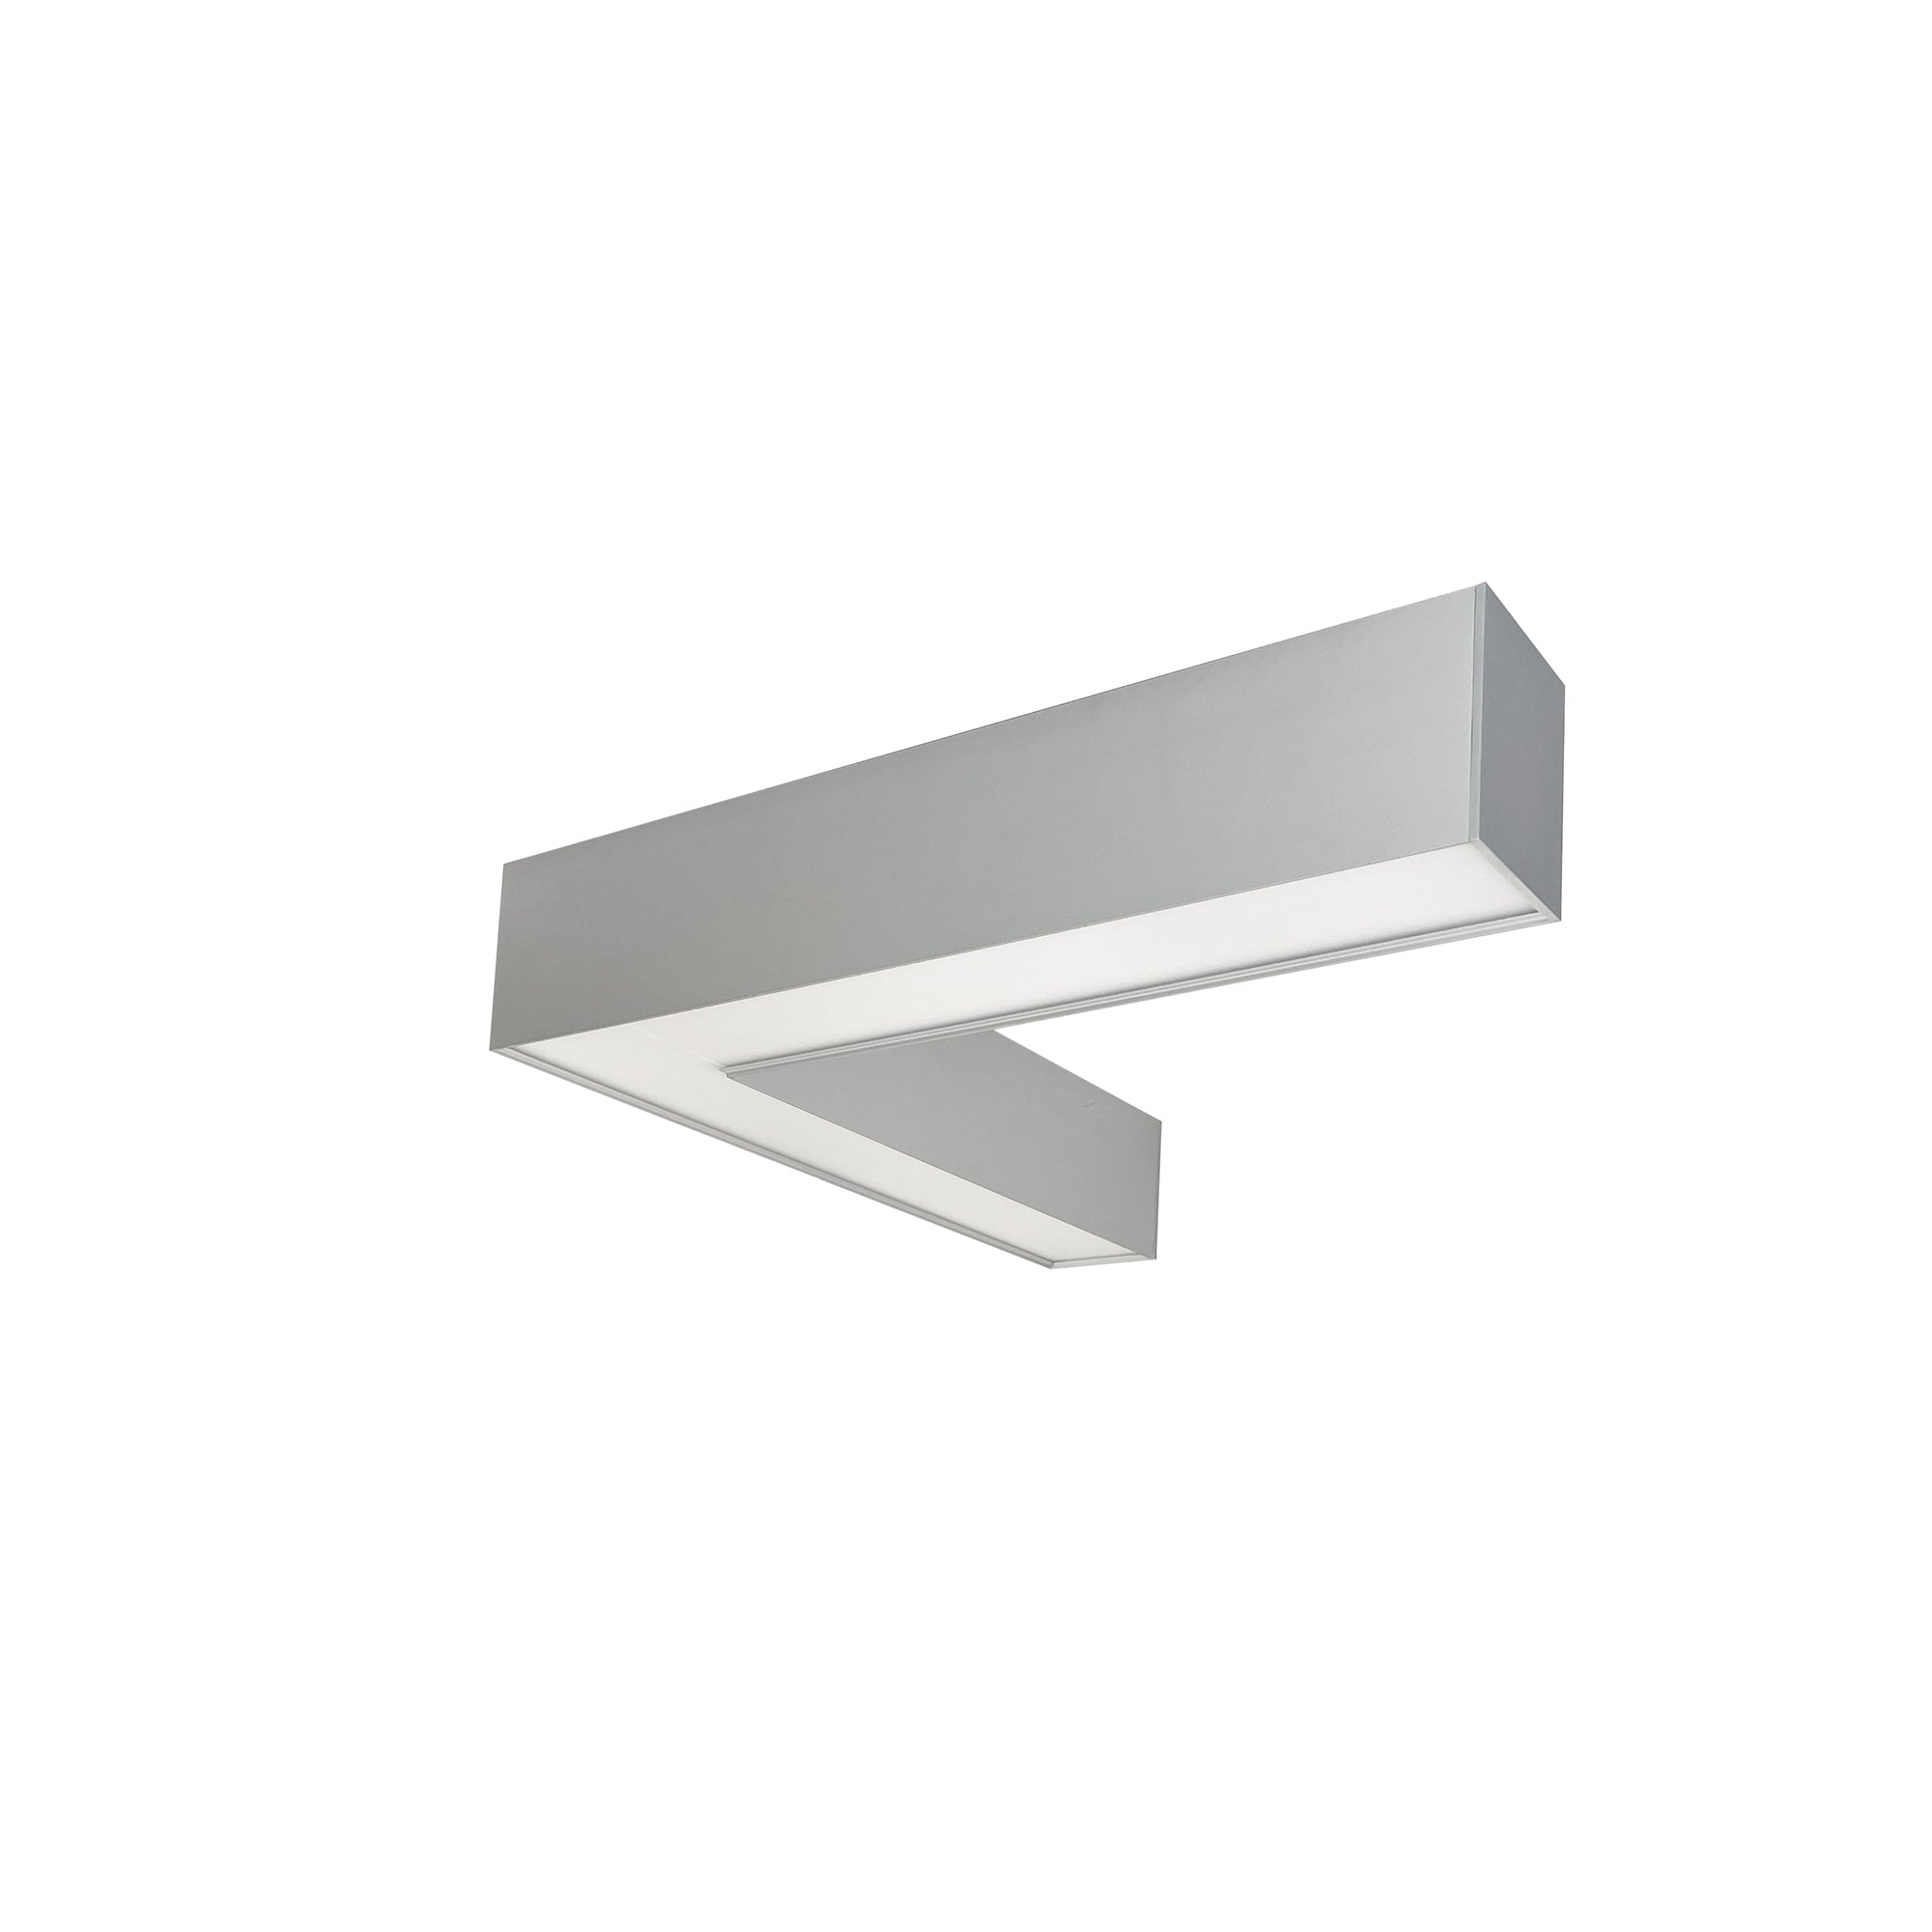 Nora Lighting NLUD-L334A - Linear -  InchL Inch Shaped L-Line LED Indirect/Direct Linear, 3781lm / Selectable CCT, Aluminum Finish